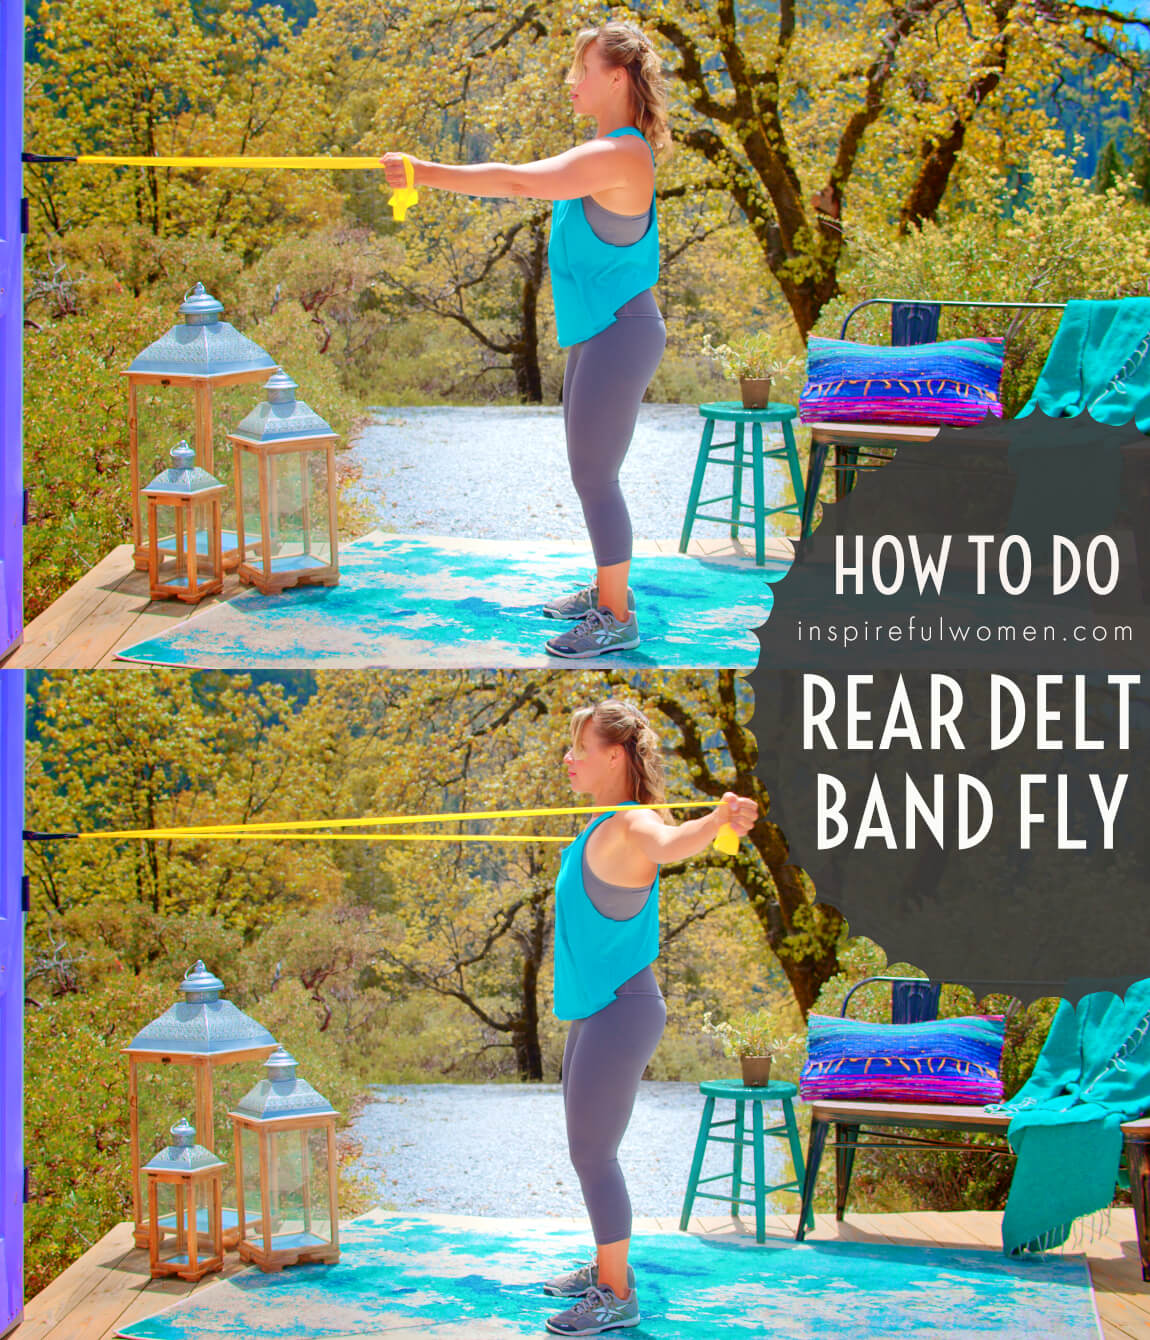 how-to-2-arm-banded-rear-delt-fly-wall-anchored-posterior-deltoid-upright-torso-home-shoulder-exercise-women-over-40